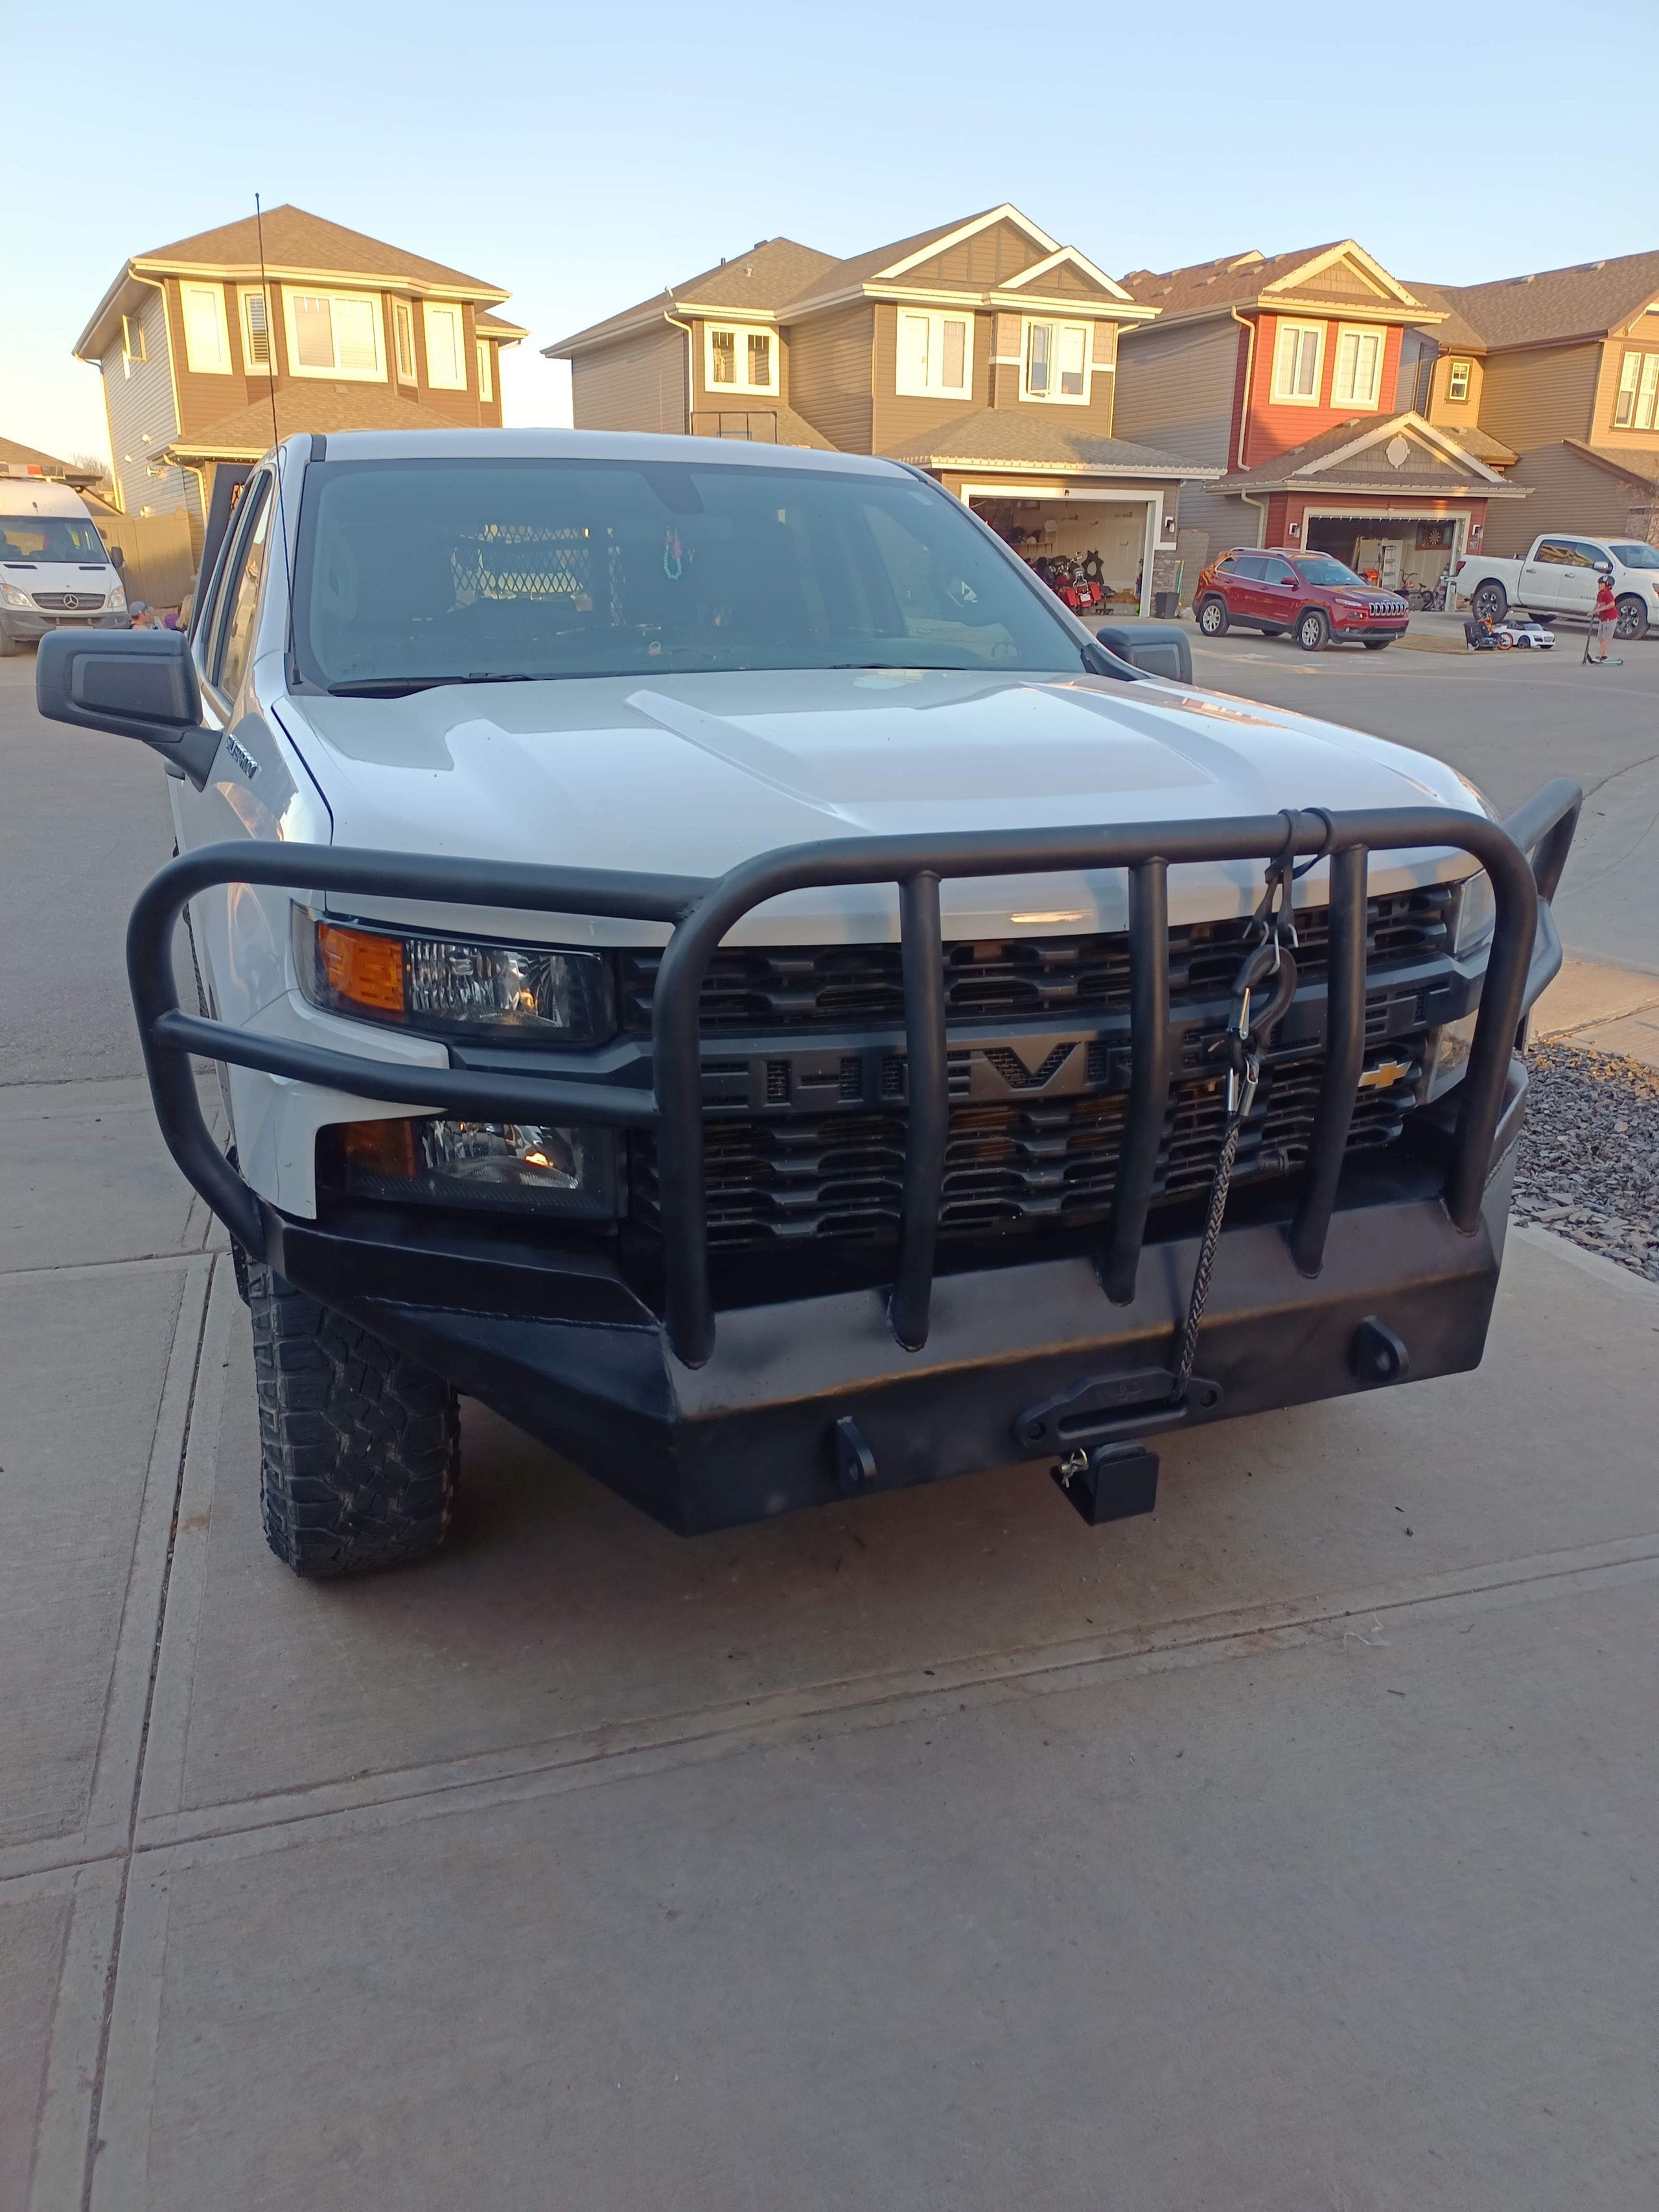 Custom off road Chevy Silverado front bumper with full coverage grille guard, hidden winch mount and front receiver